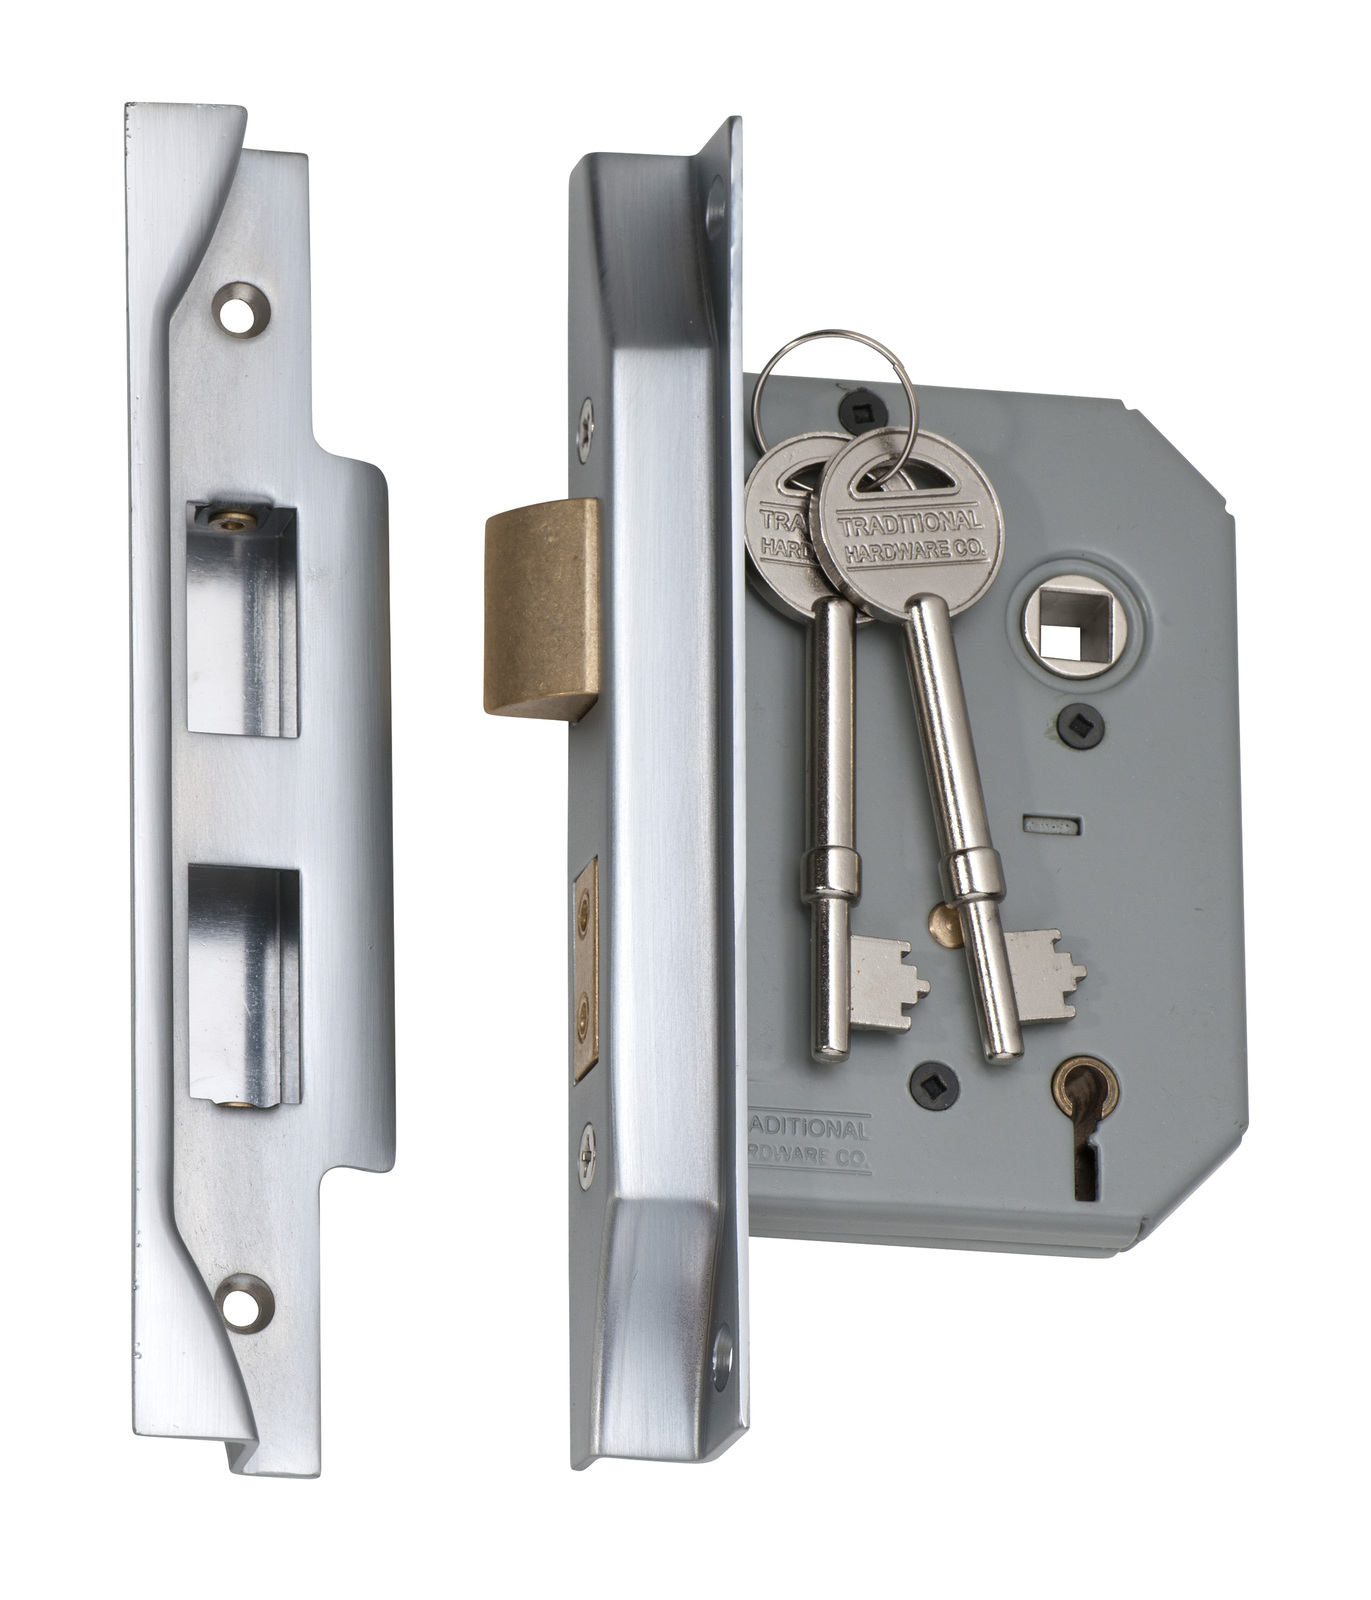 tradco-rebated-5-lever-mortice-lock-available-in-various-finishes-ebay